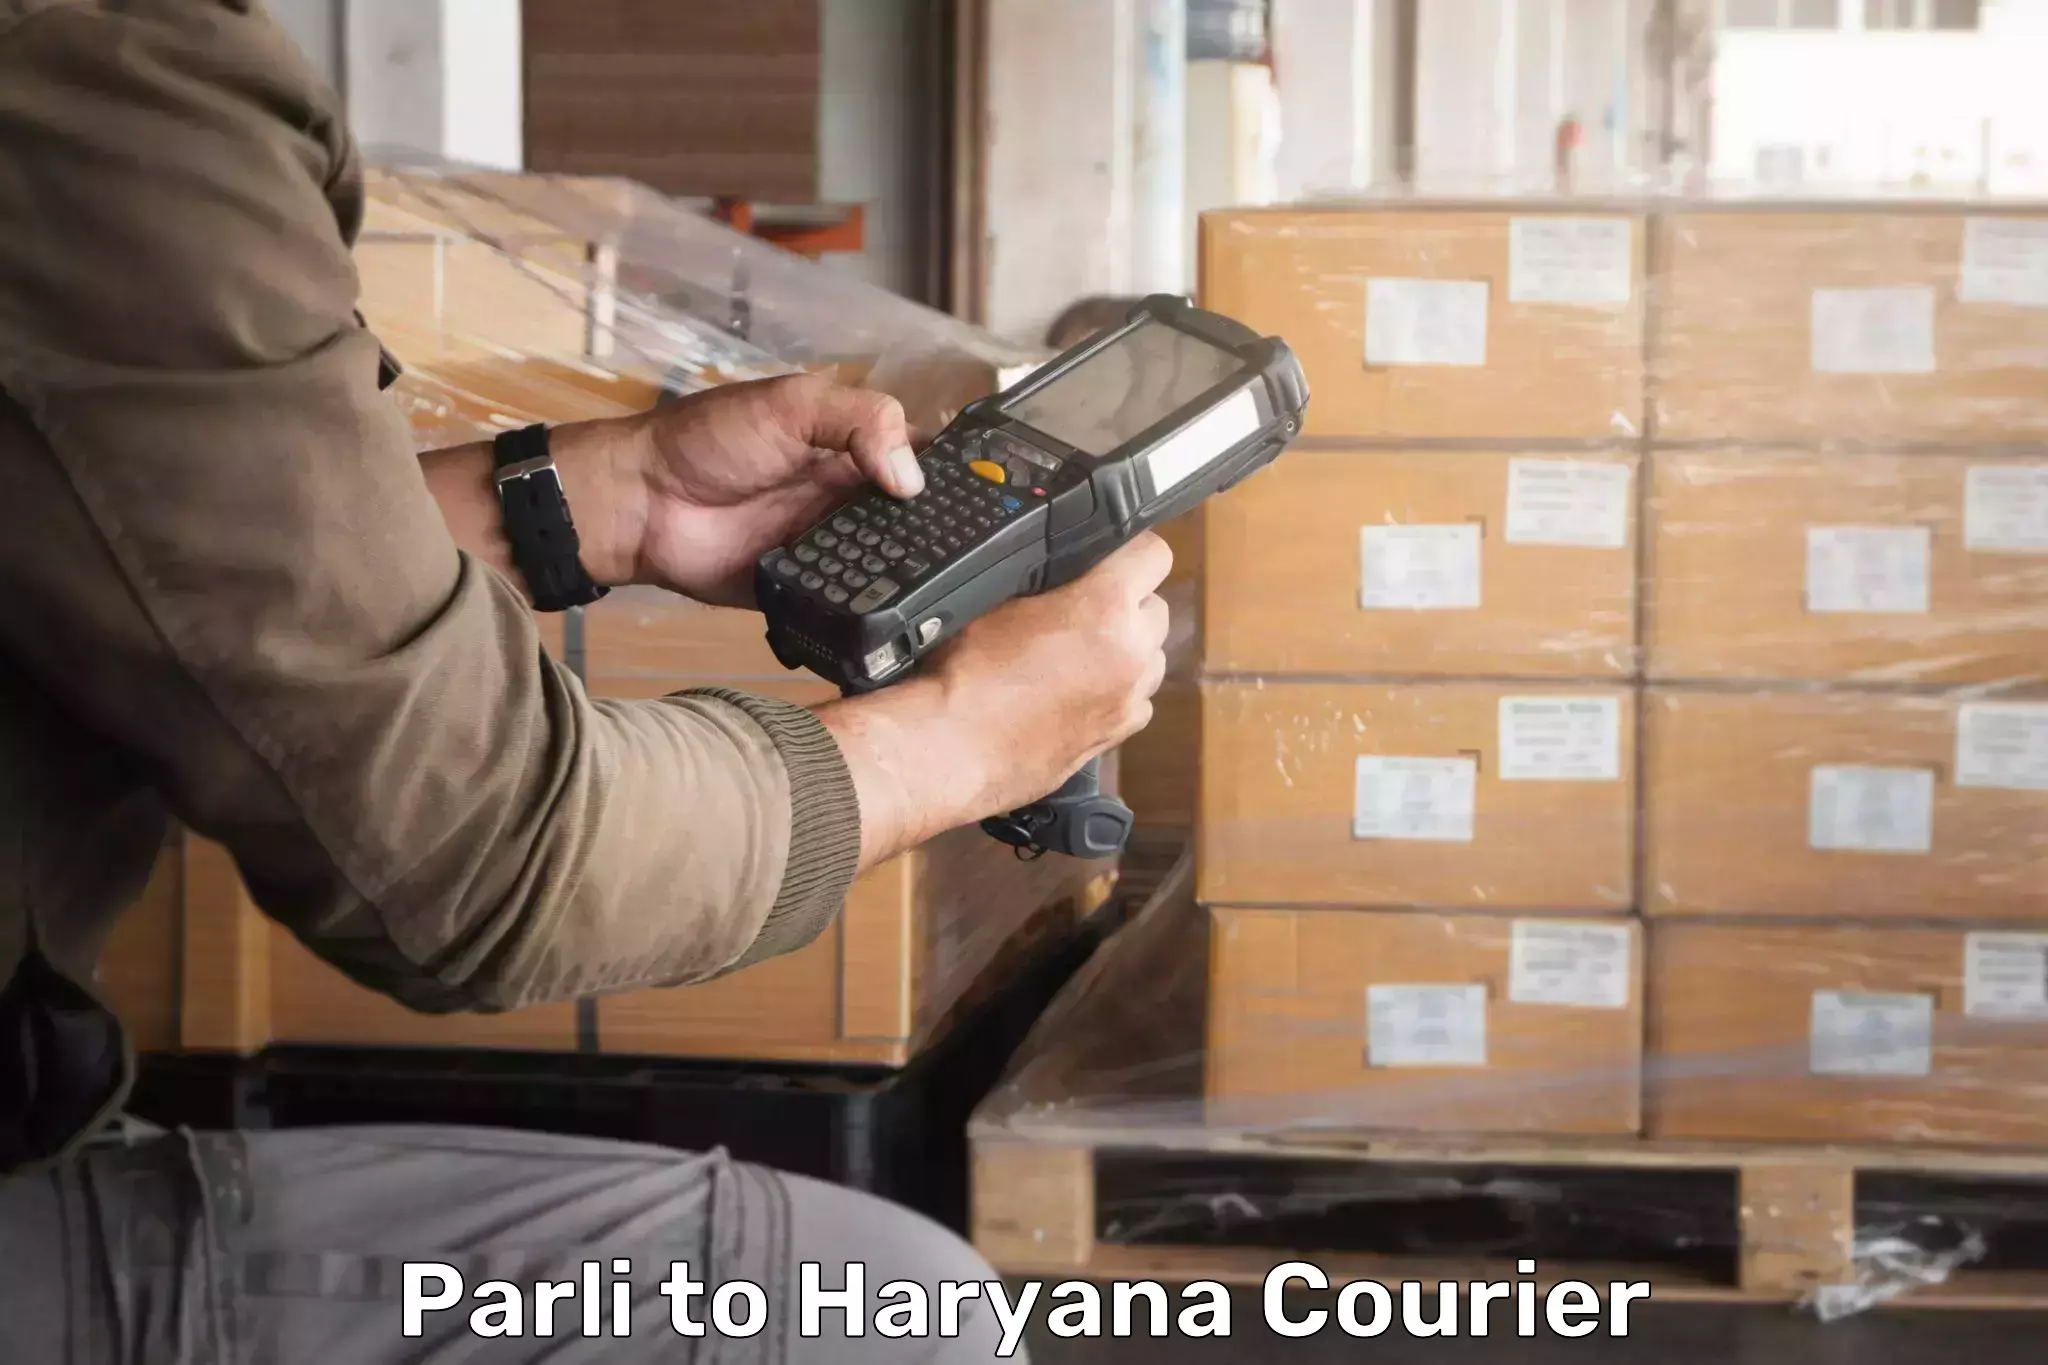 Courier service efficiency in Parli to Panchkula